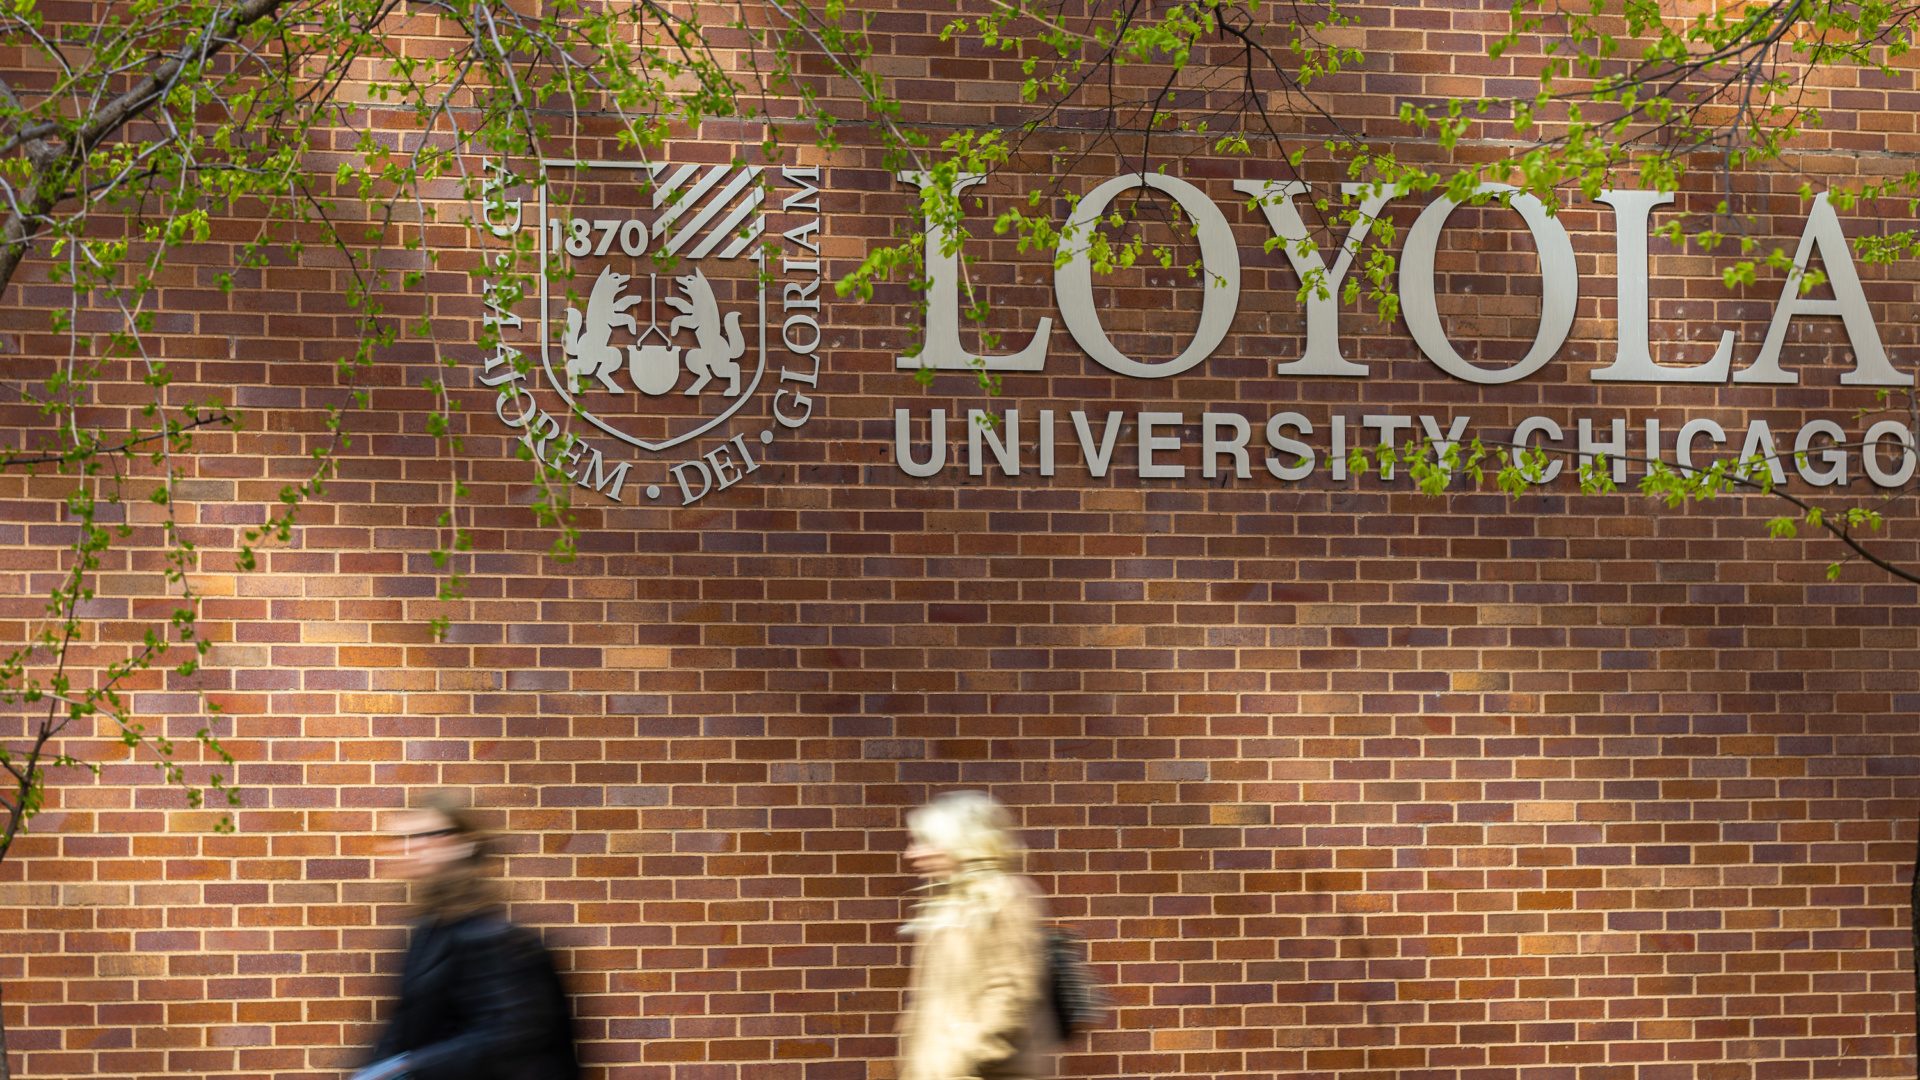 Two people walk by a campus sign for Loyola University Chicago